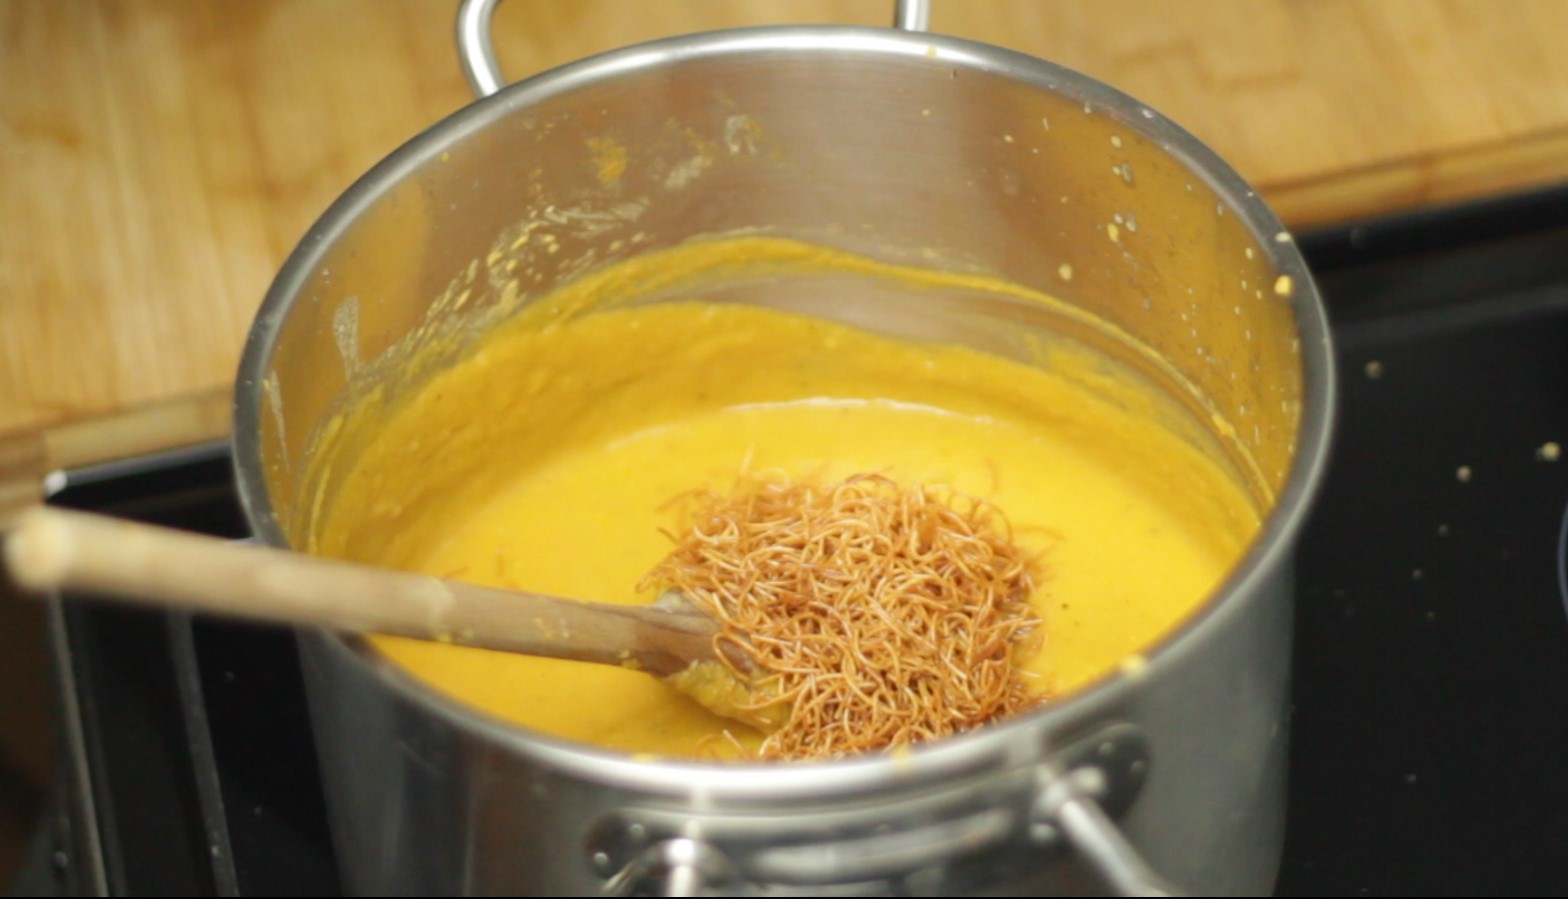 Adding vermicelli adds texture to the creamy soup (@middleeats)